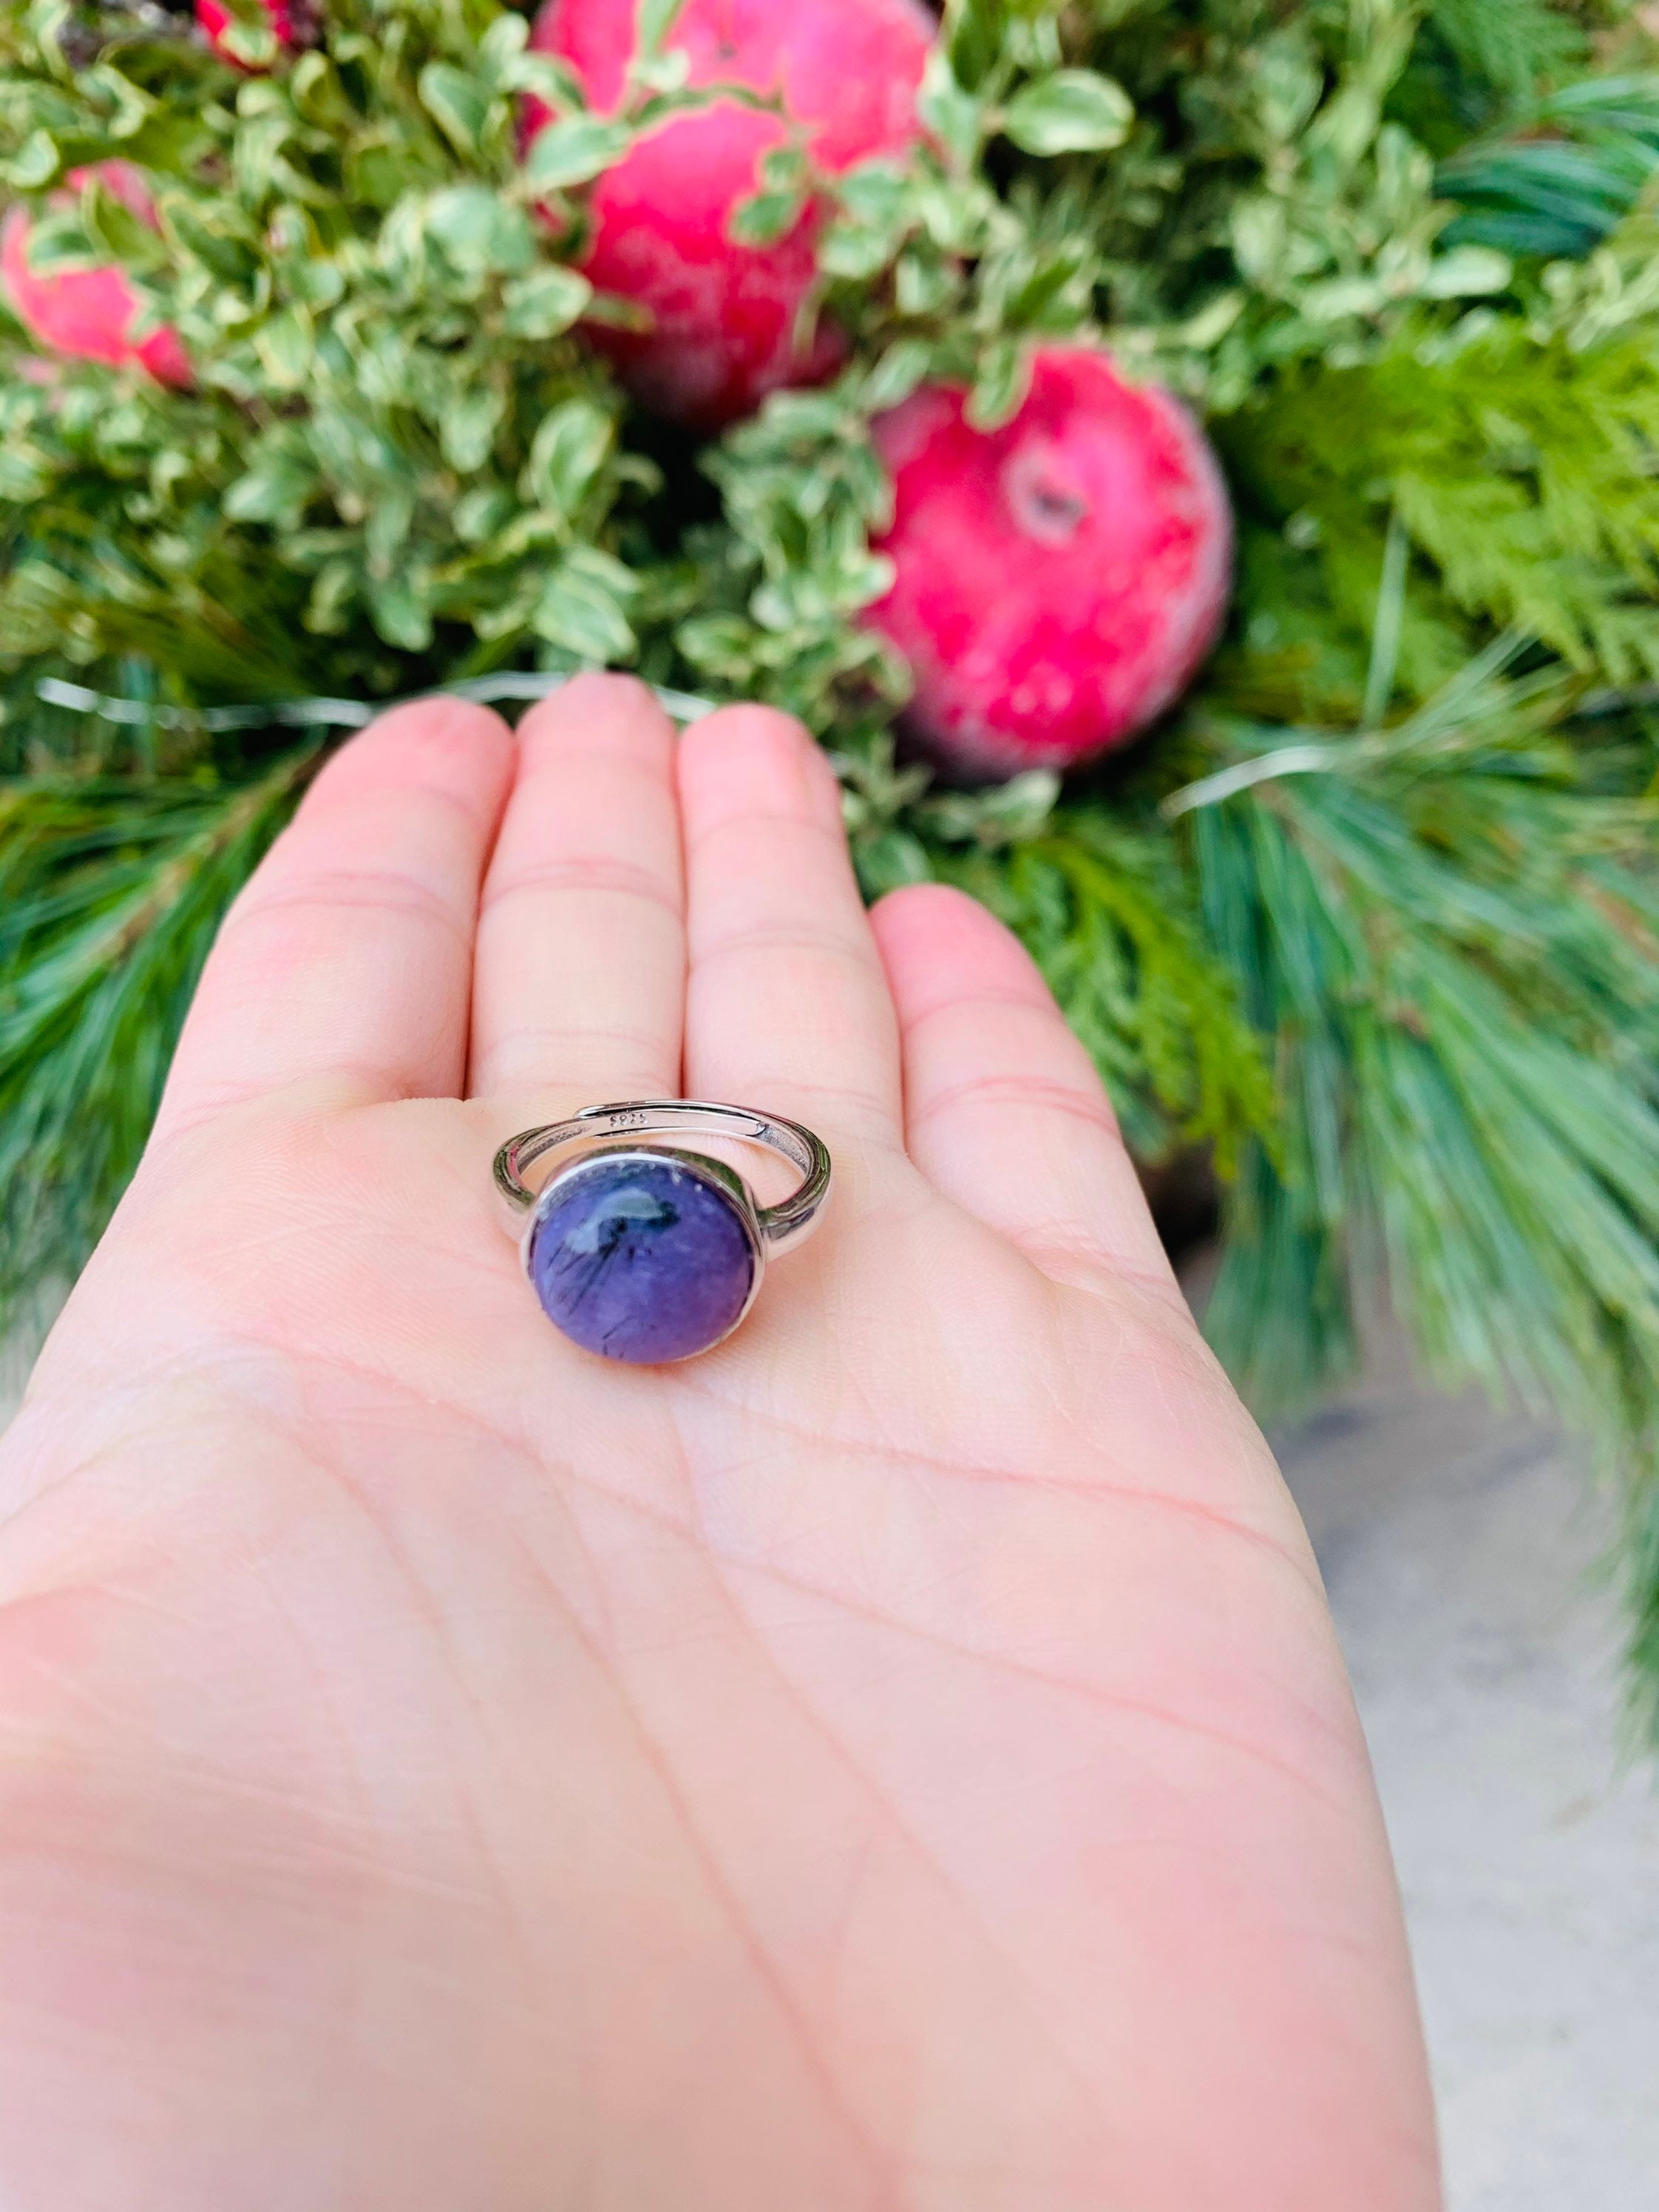 Gorgeous 12mm charoite ring set in 925 sterling | Etsy